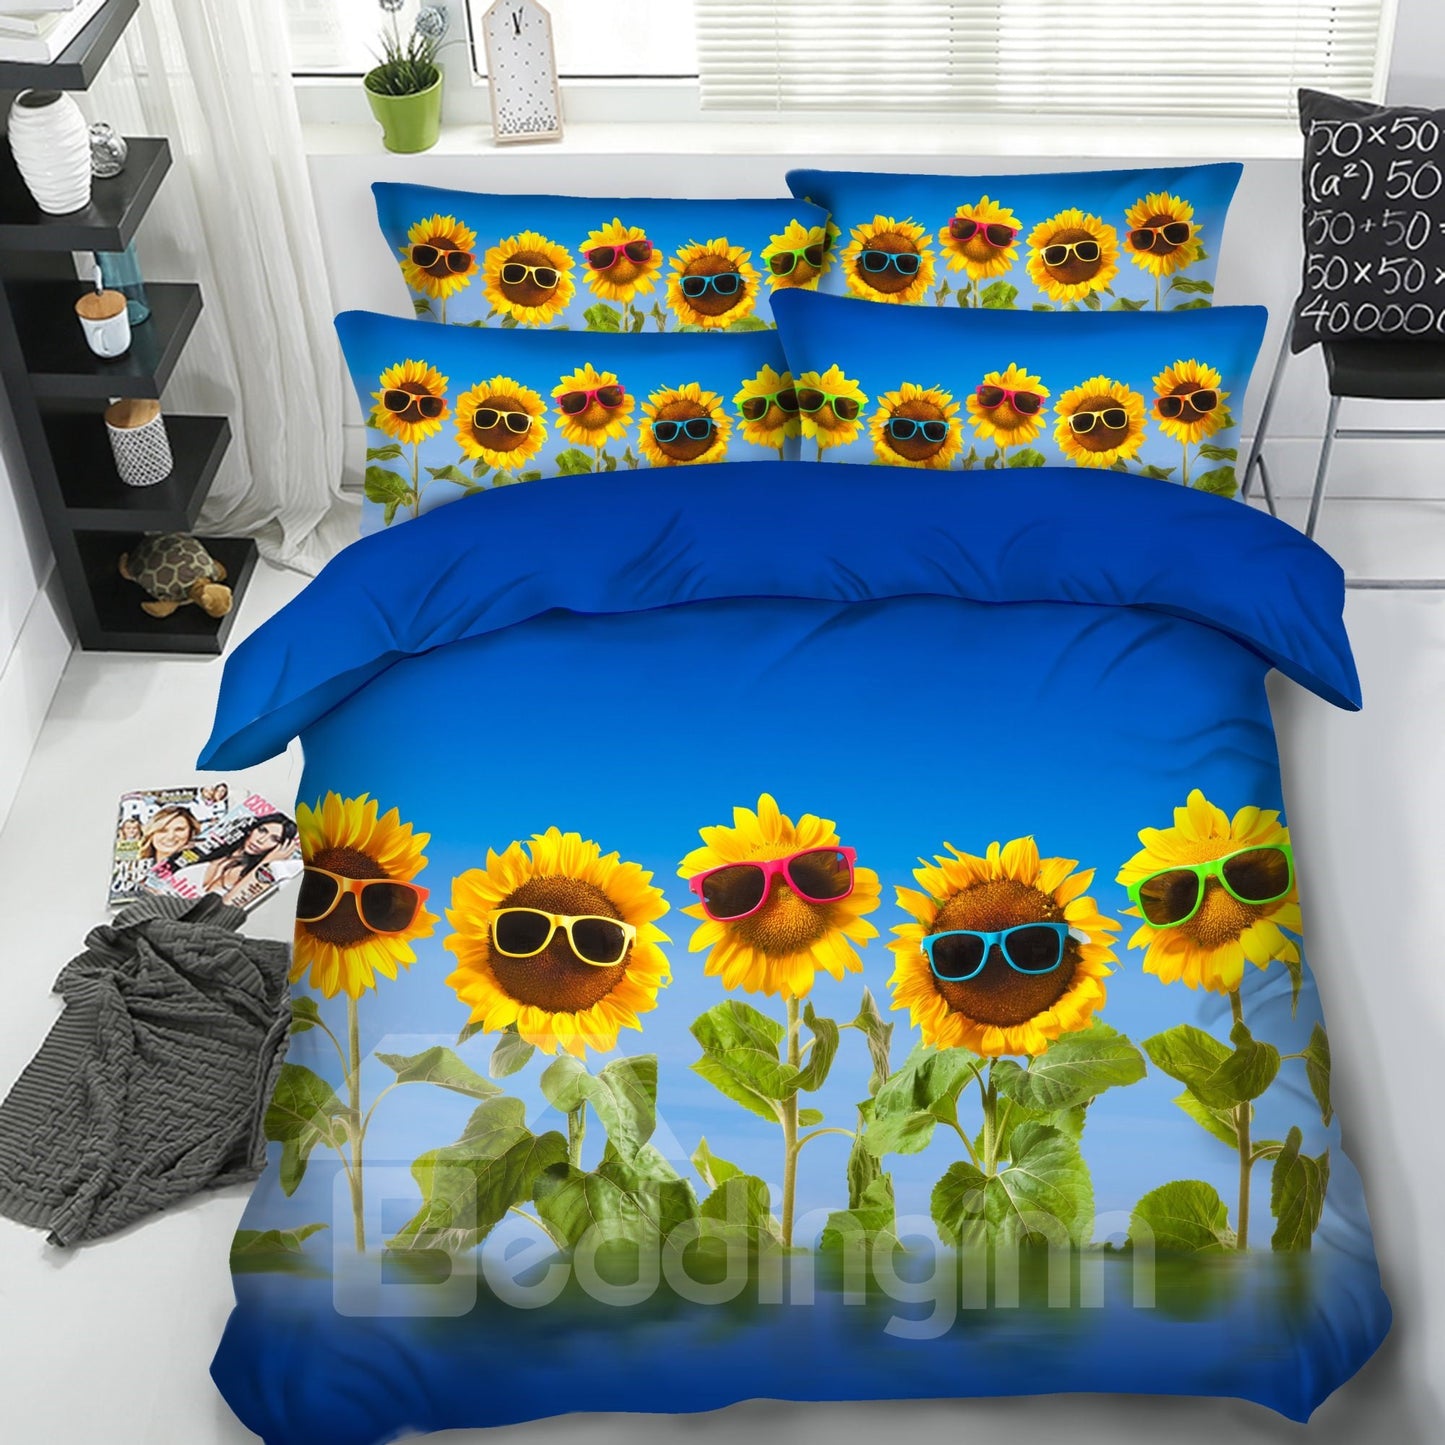 Sunflowers with Sunglasses under the Sky Printed 4-Piece 3D Bedding Sets/Duvet Covers